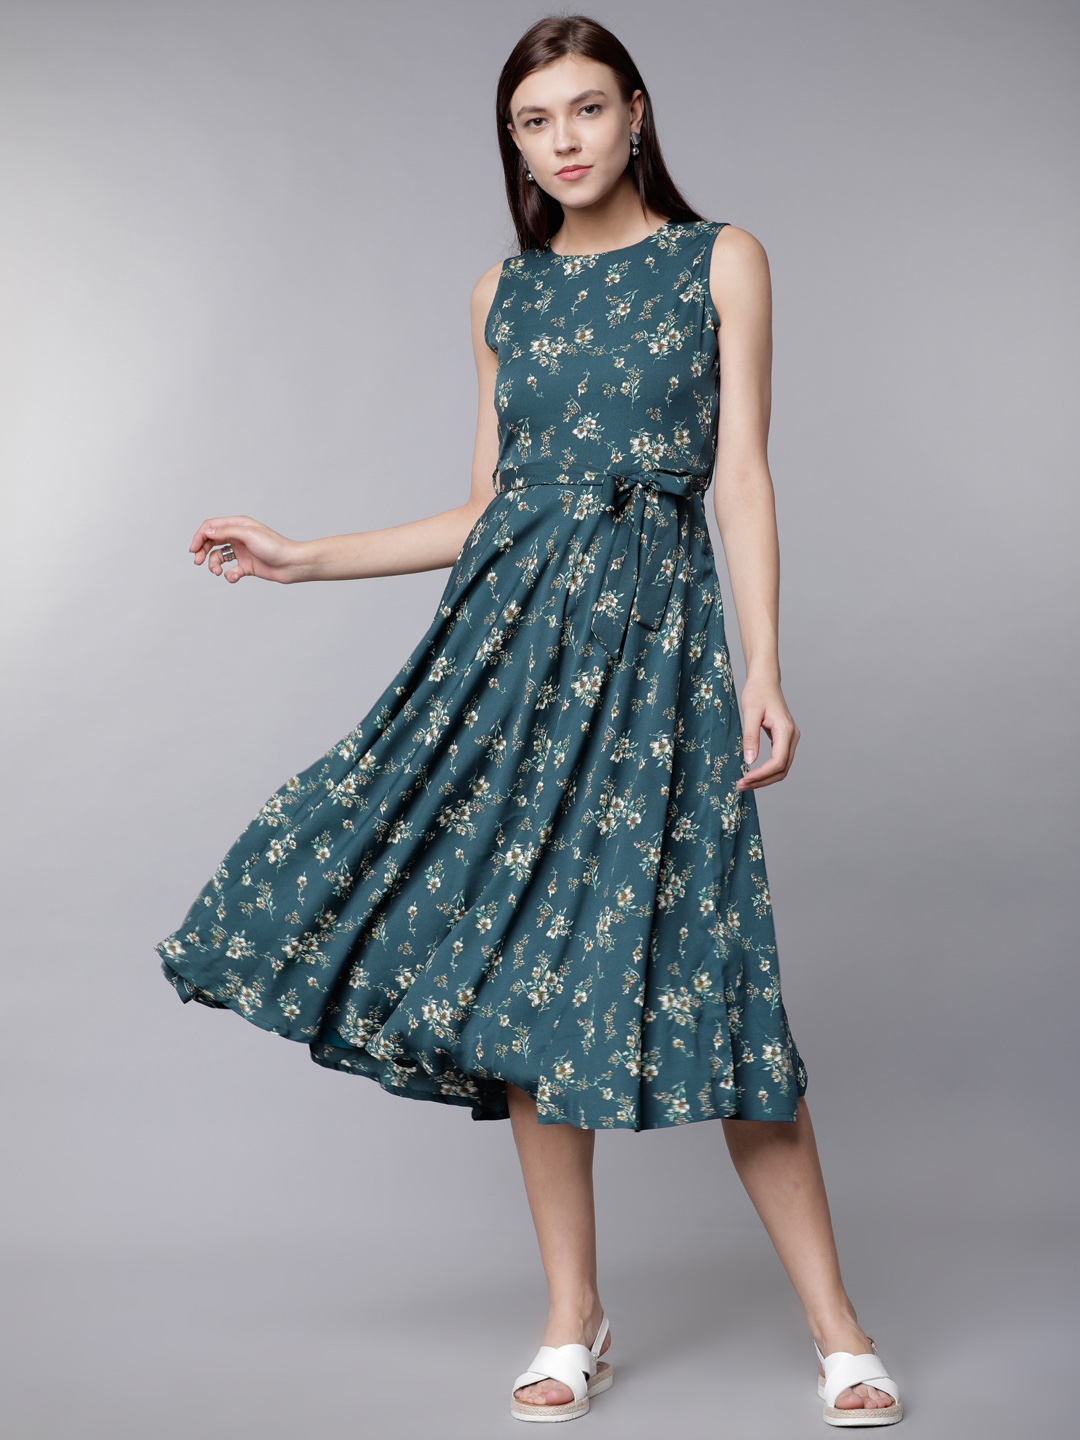 Buy Tokyo Talkies Women Teal Blue Floral Print Fit And Flare Dress ...